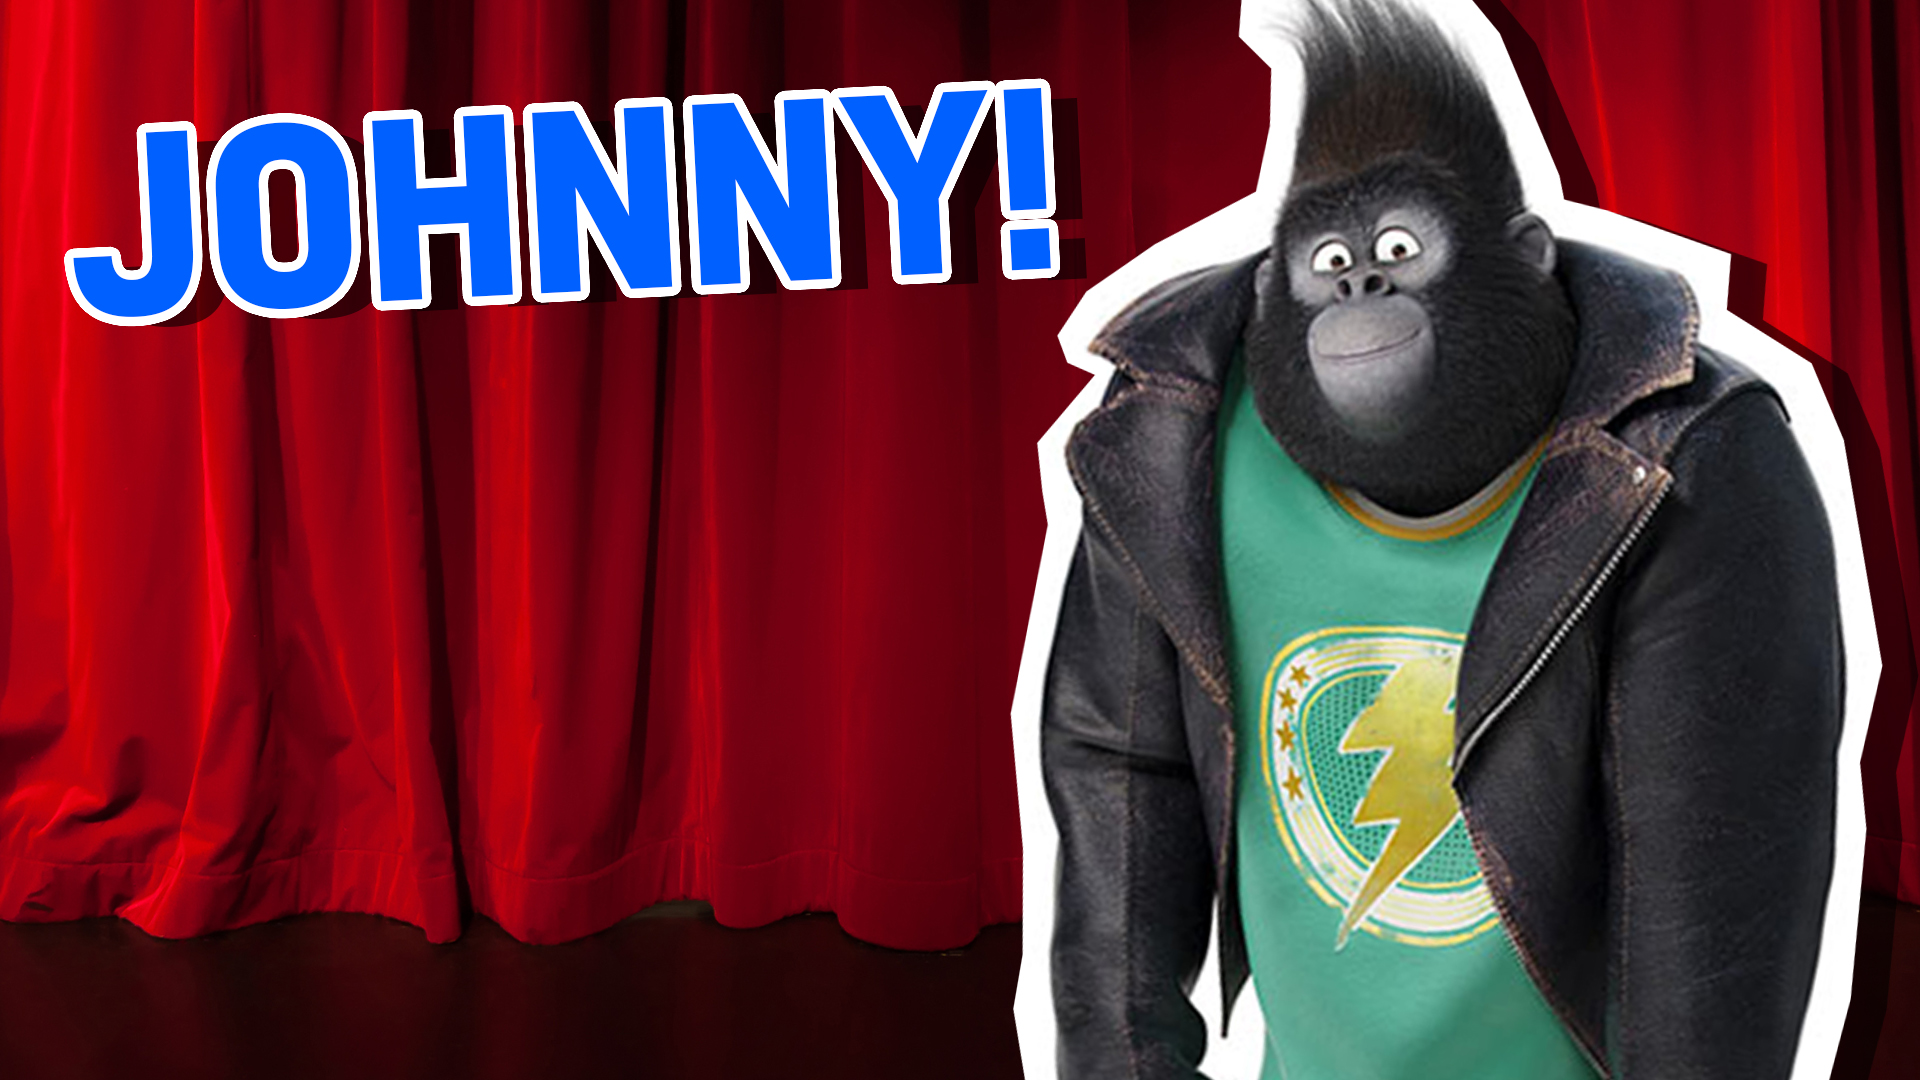 Johnny from Sing! What Sing Character Are You? | Sing Quiz